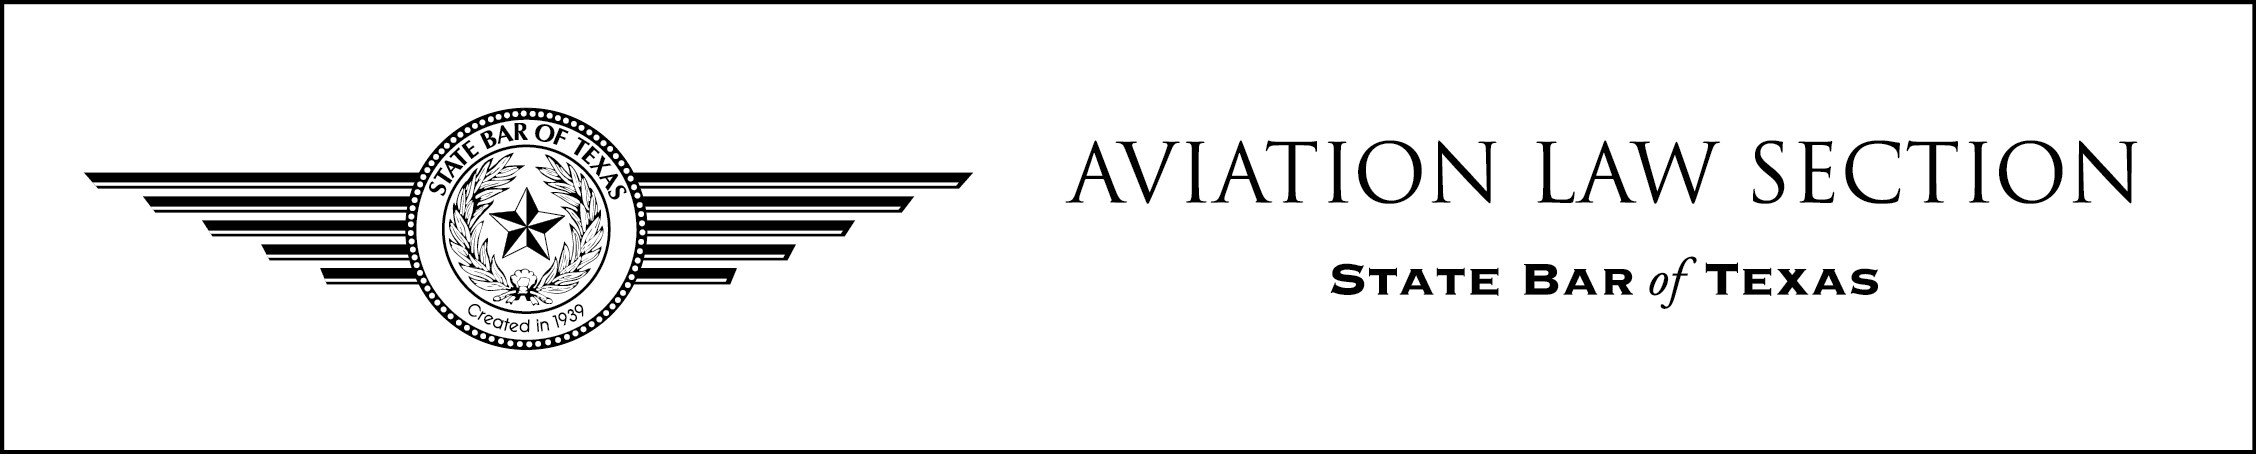 Aviation Law Website for the State Bar of Texas